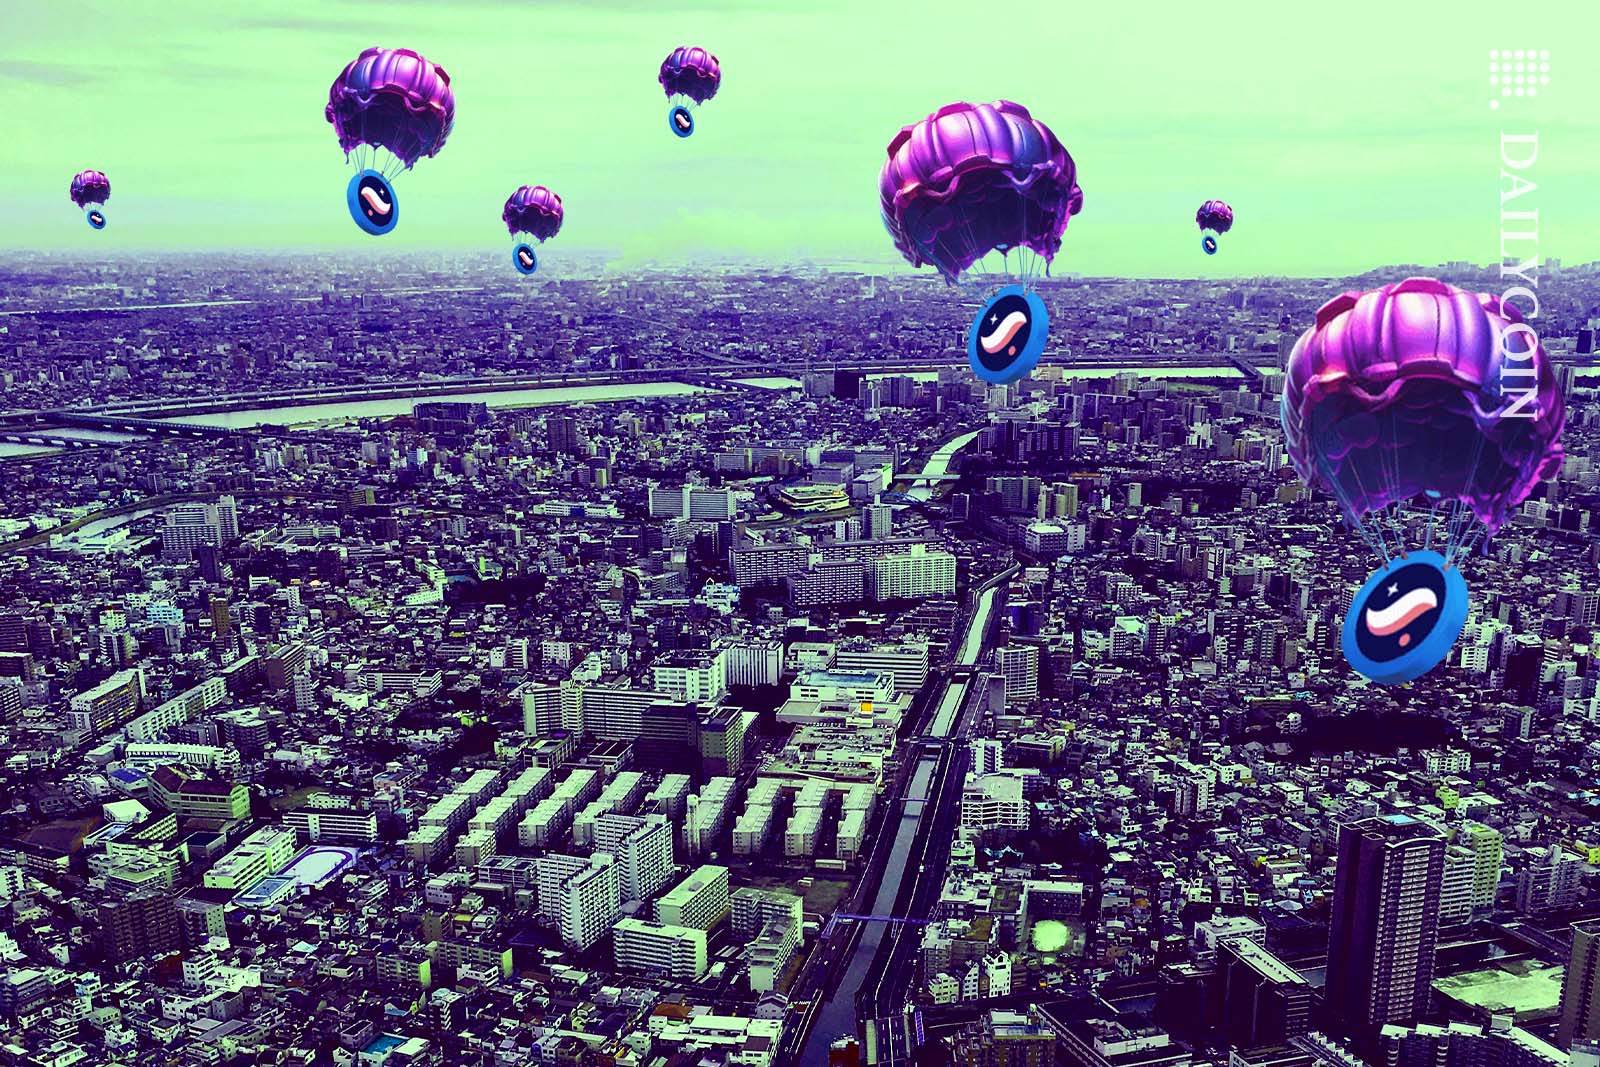 Starknet tokens being airdropped on a huge urban area.